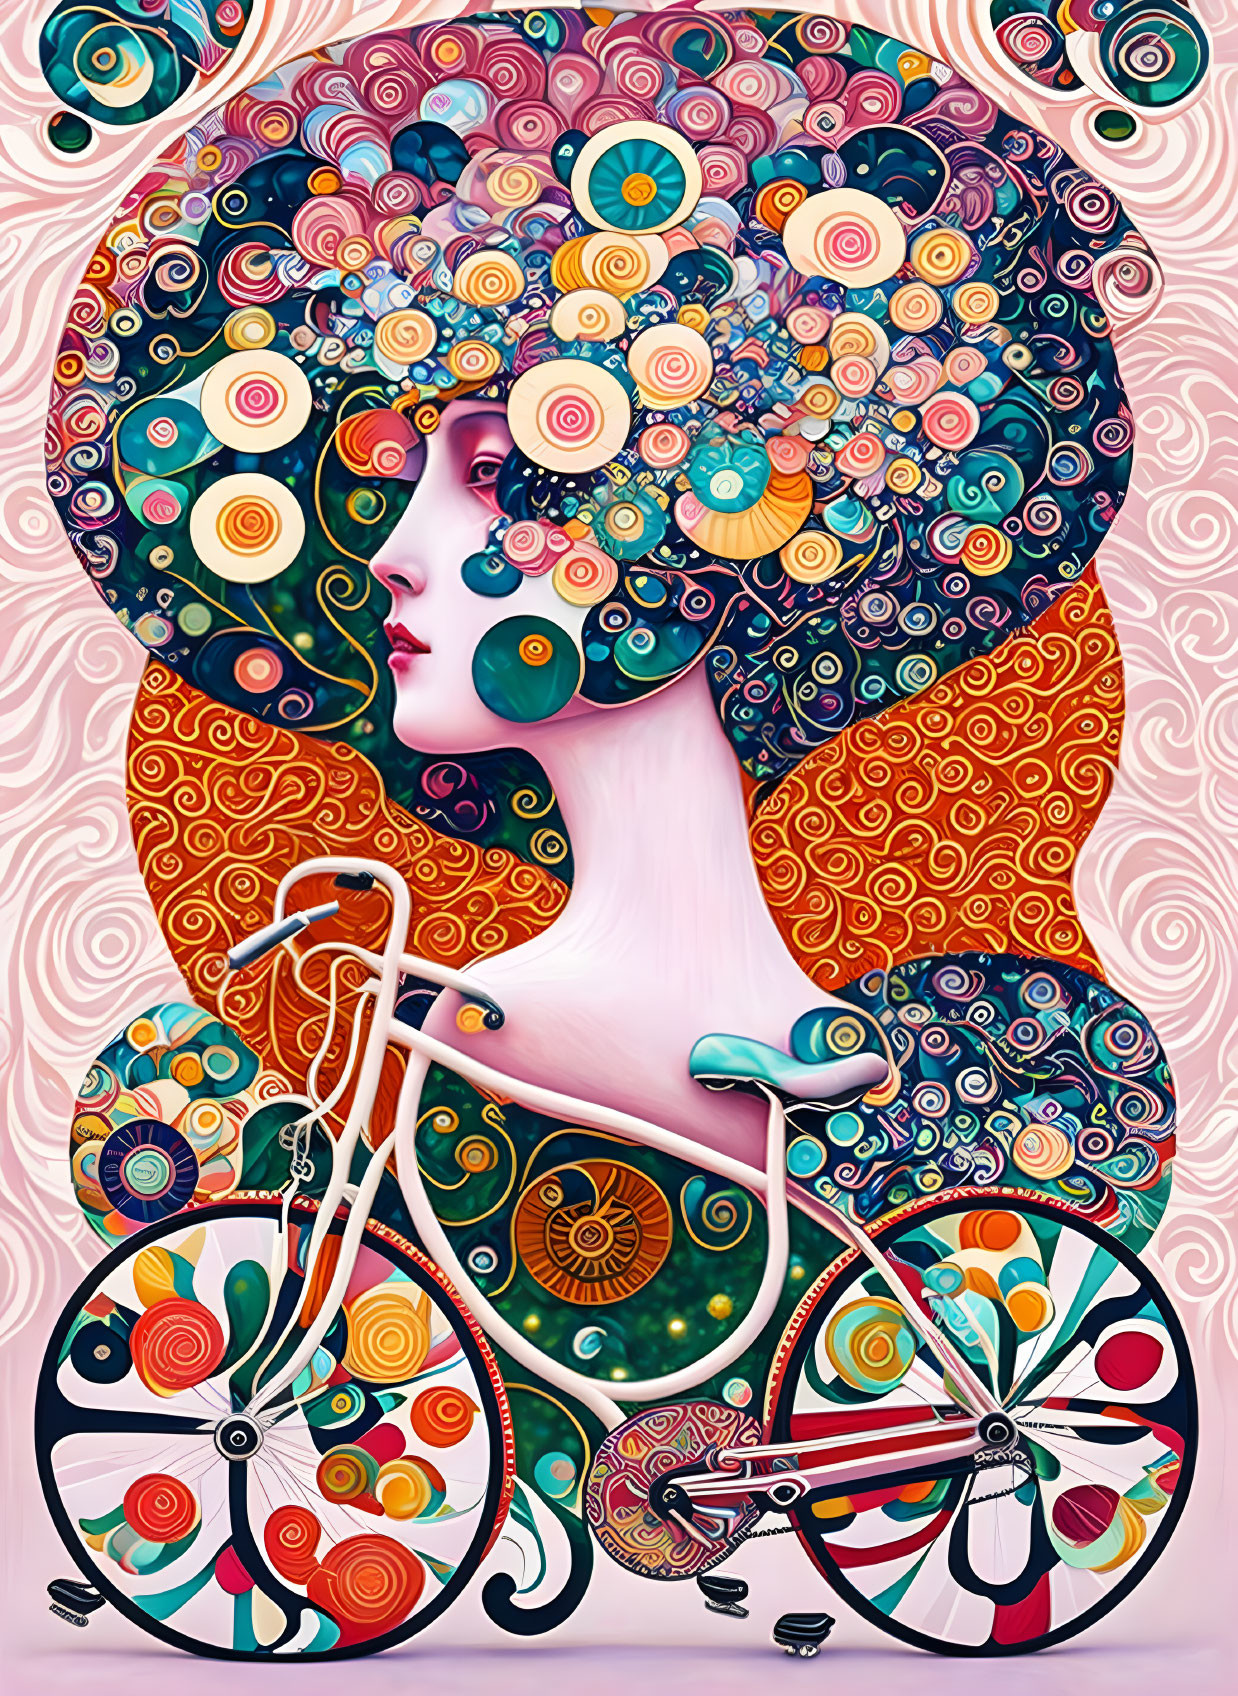 The girl with the bike